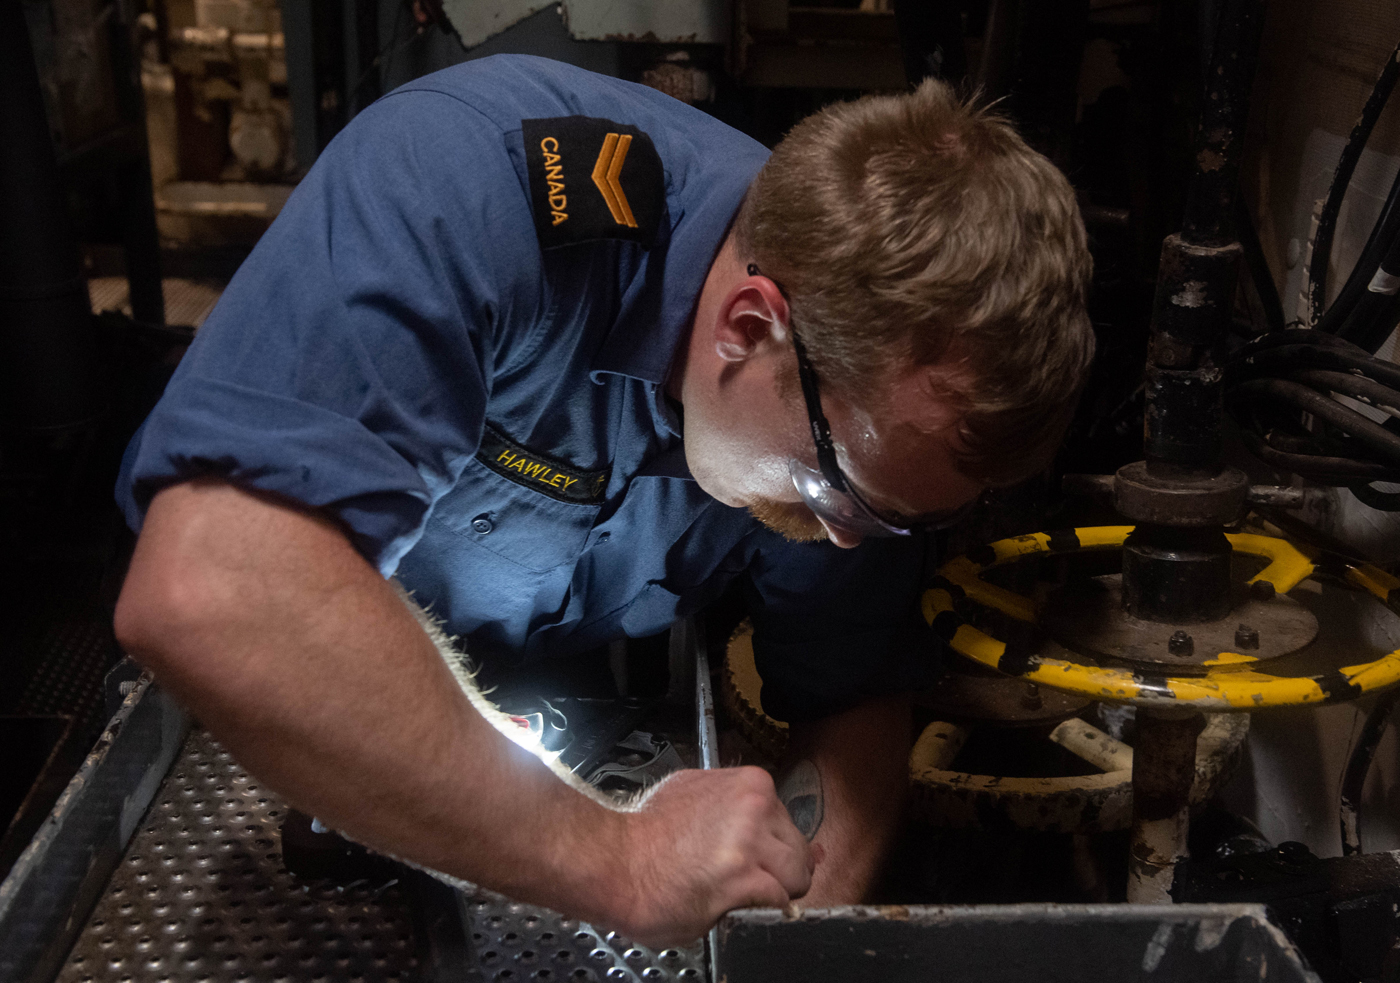 S1 Sheldon Hawley conducts maintenance on valves in the Forward Auxiliary Machine Room.